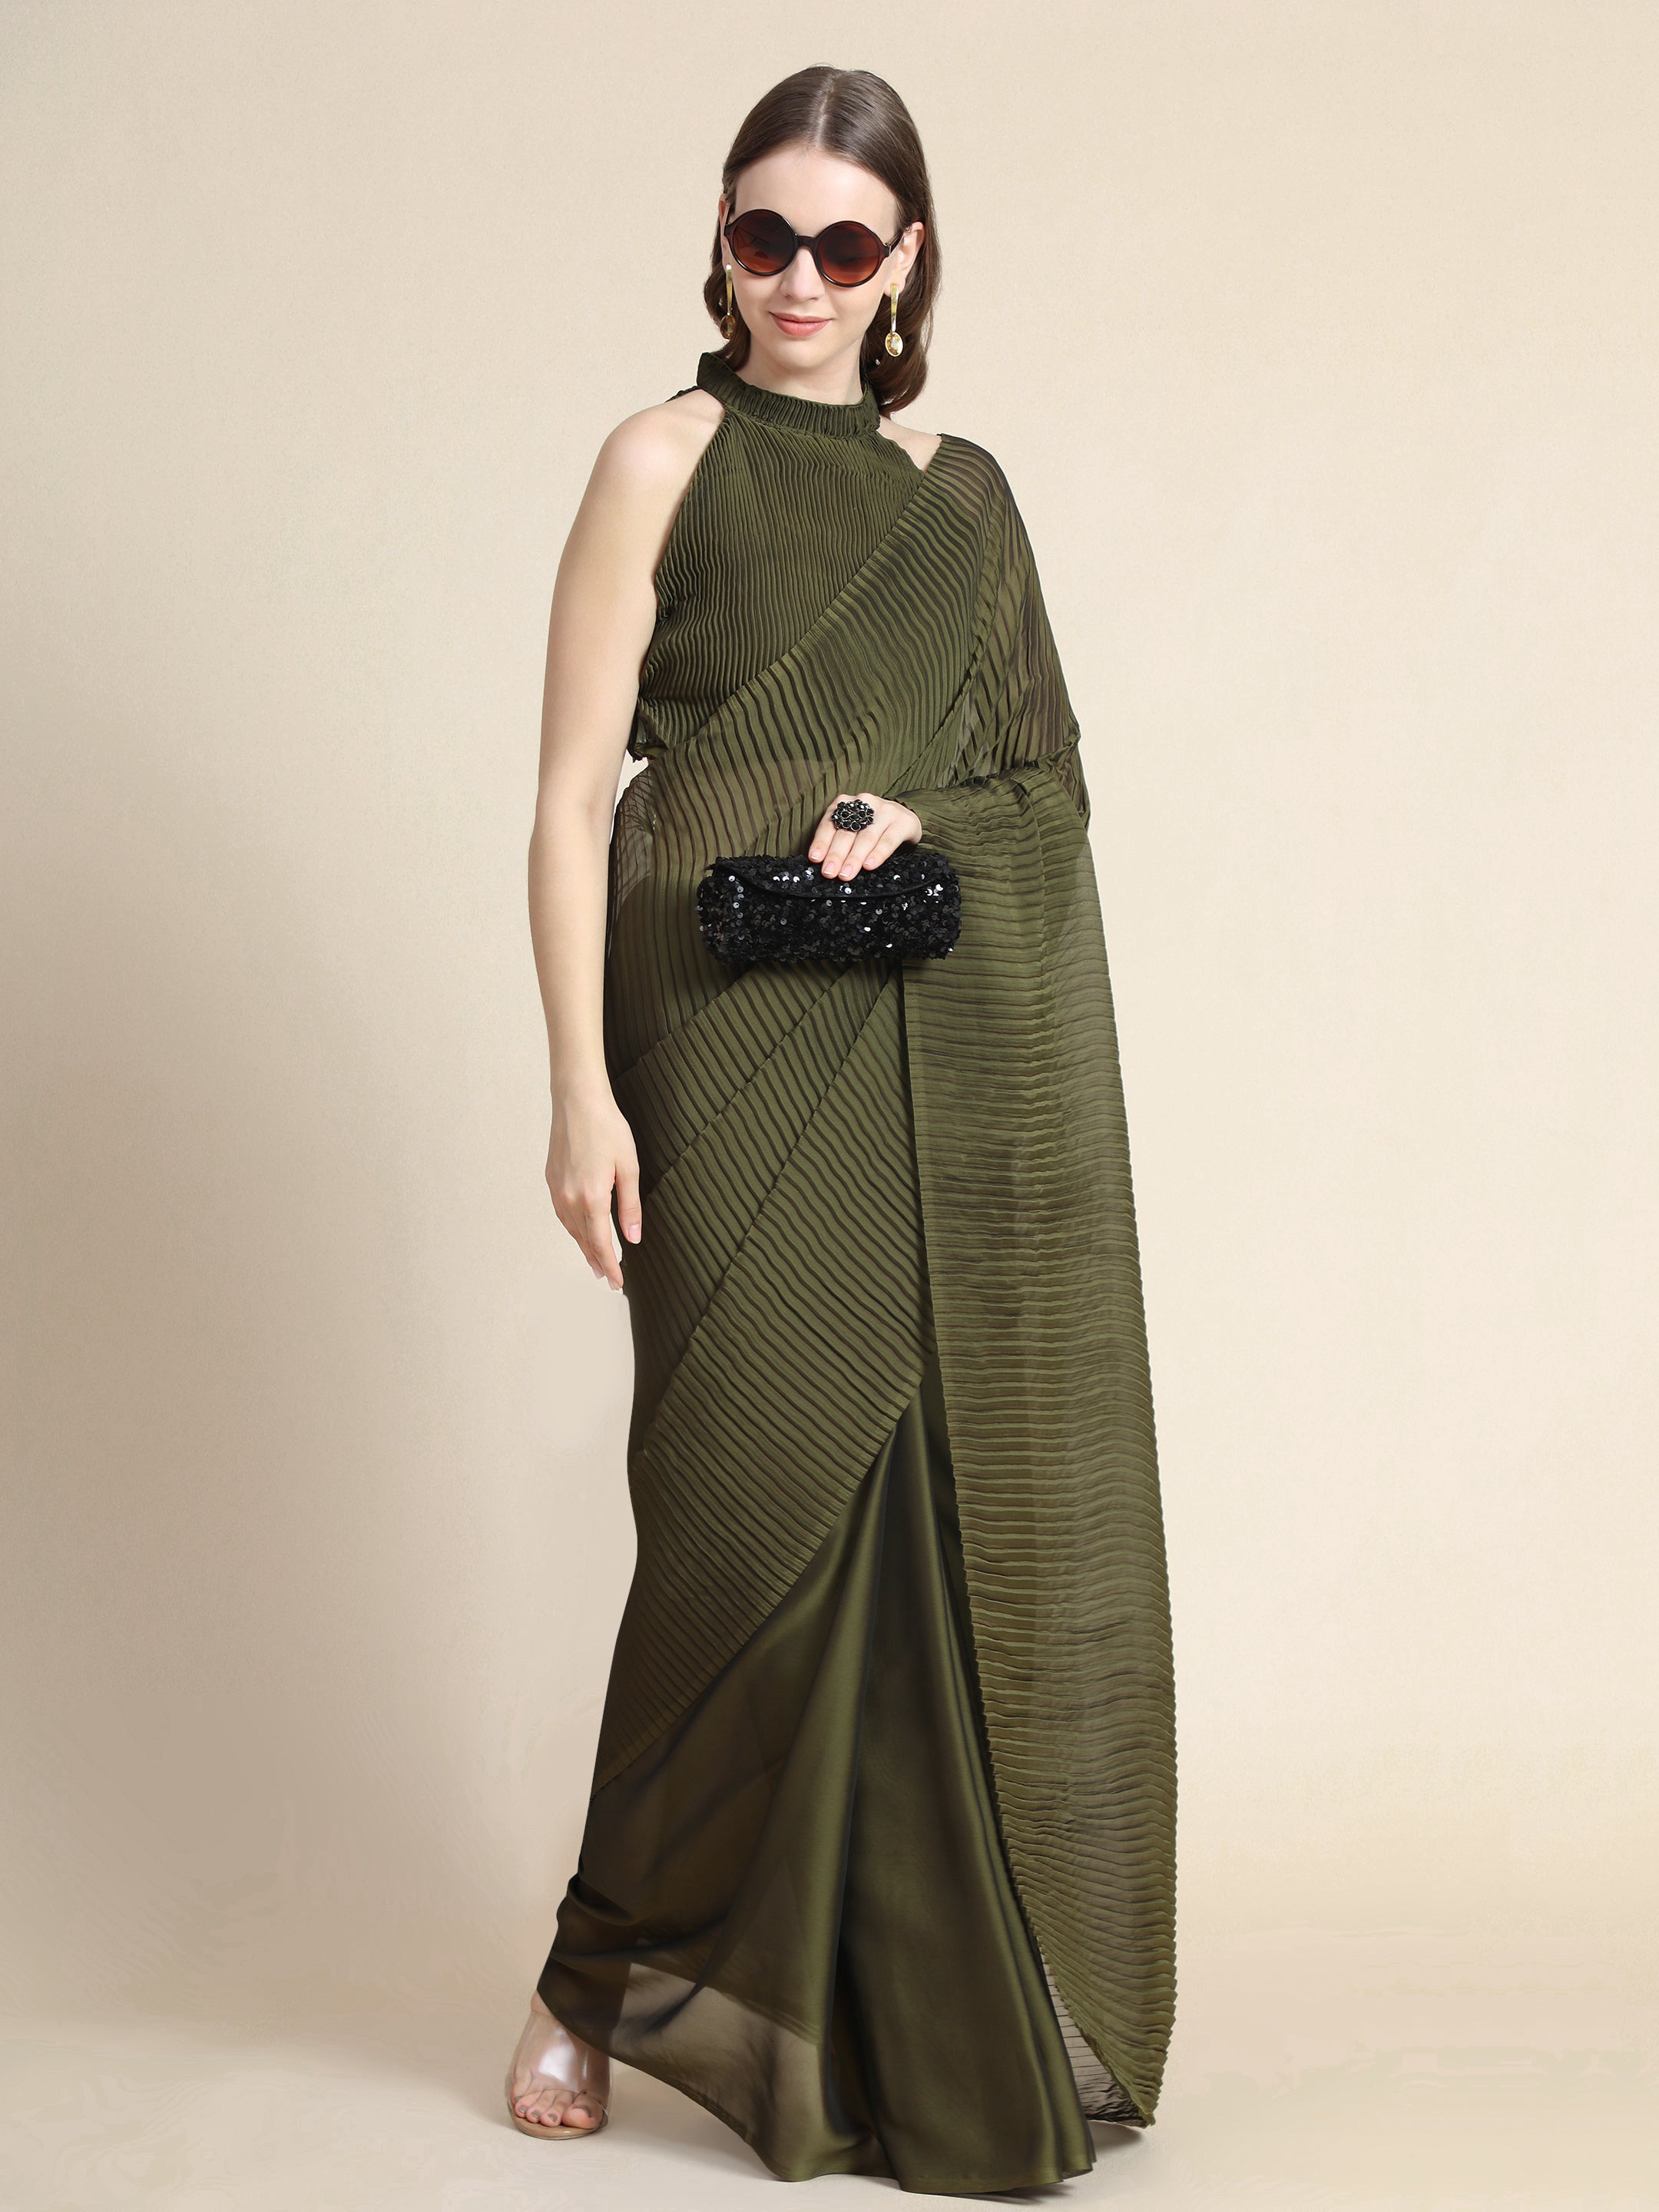 Women's Self woven Self Texture Patry Wear Contemporay Crush Silk Saree With Blouse Piece (Mehandi Green) - NIMIDHYA